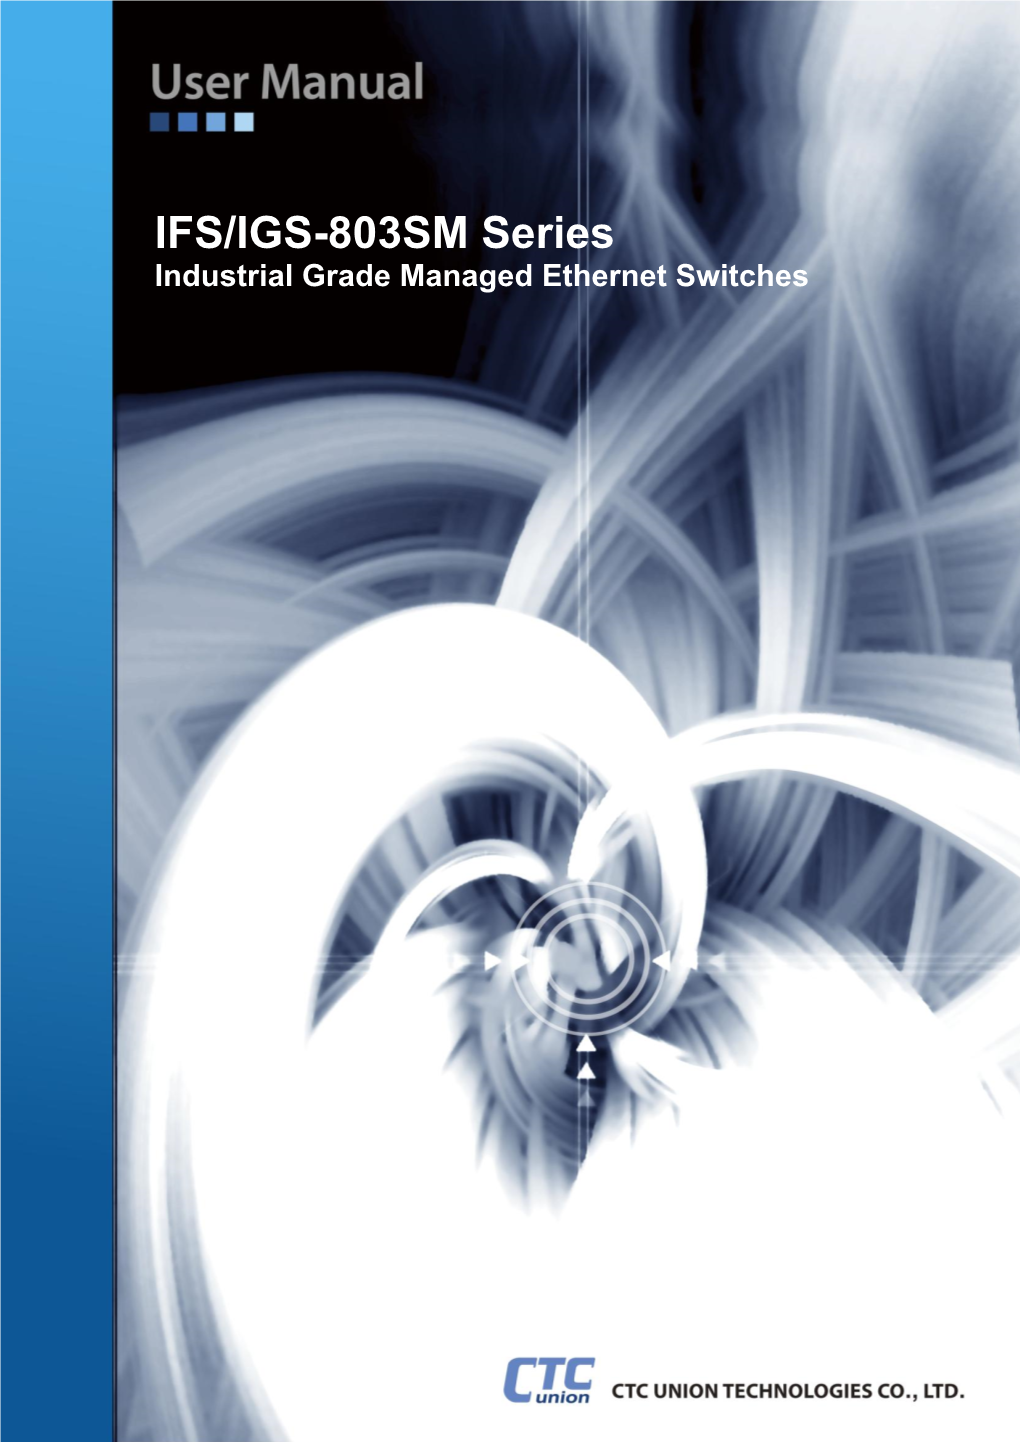 IFS/IGS-803SM Series Industrial Grade Managed Ethernet Switches